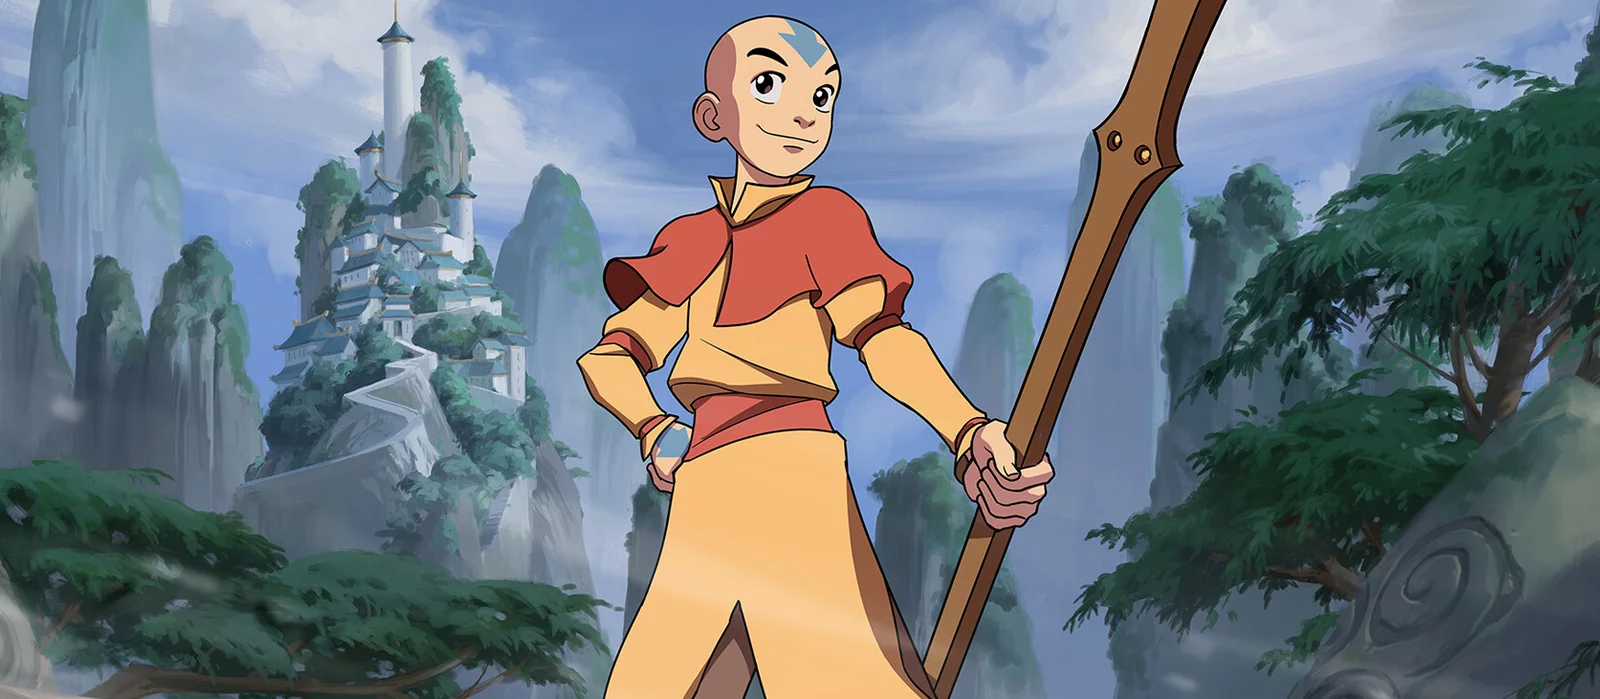 Аанг. Аватара аанг. Avtar Ank. Avatar the last airbender in english